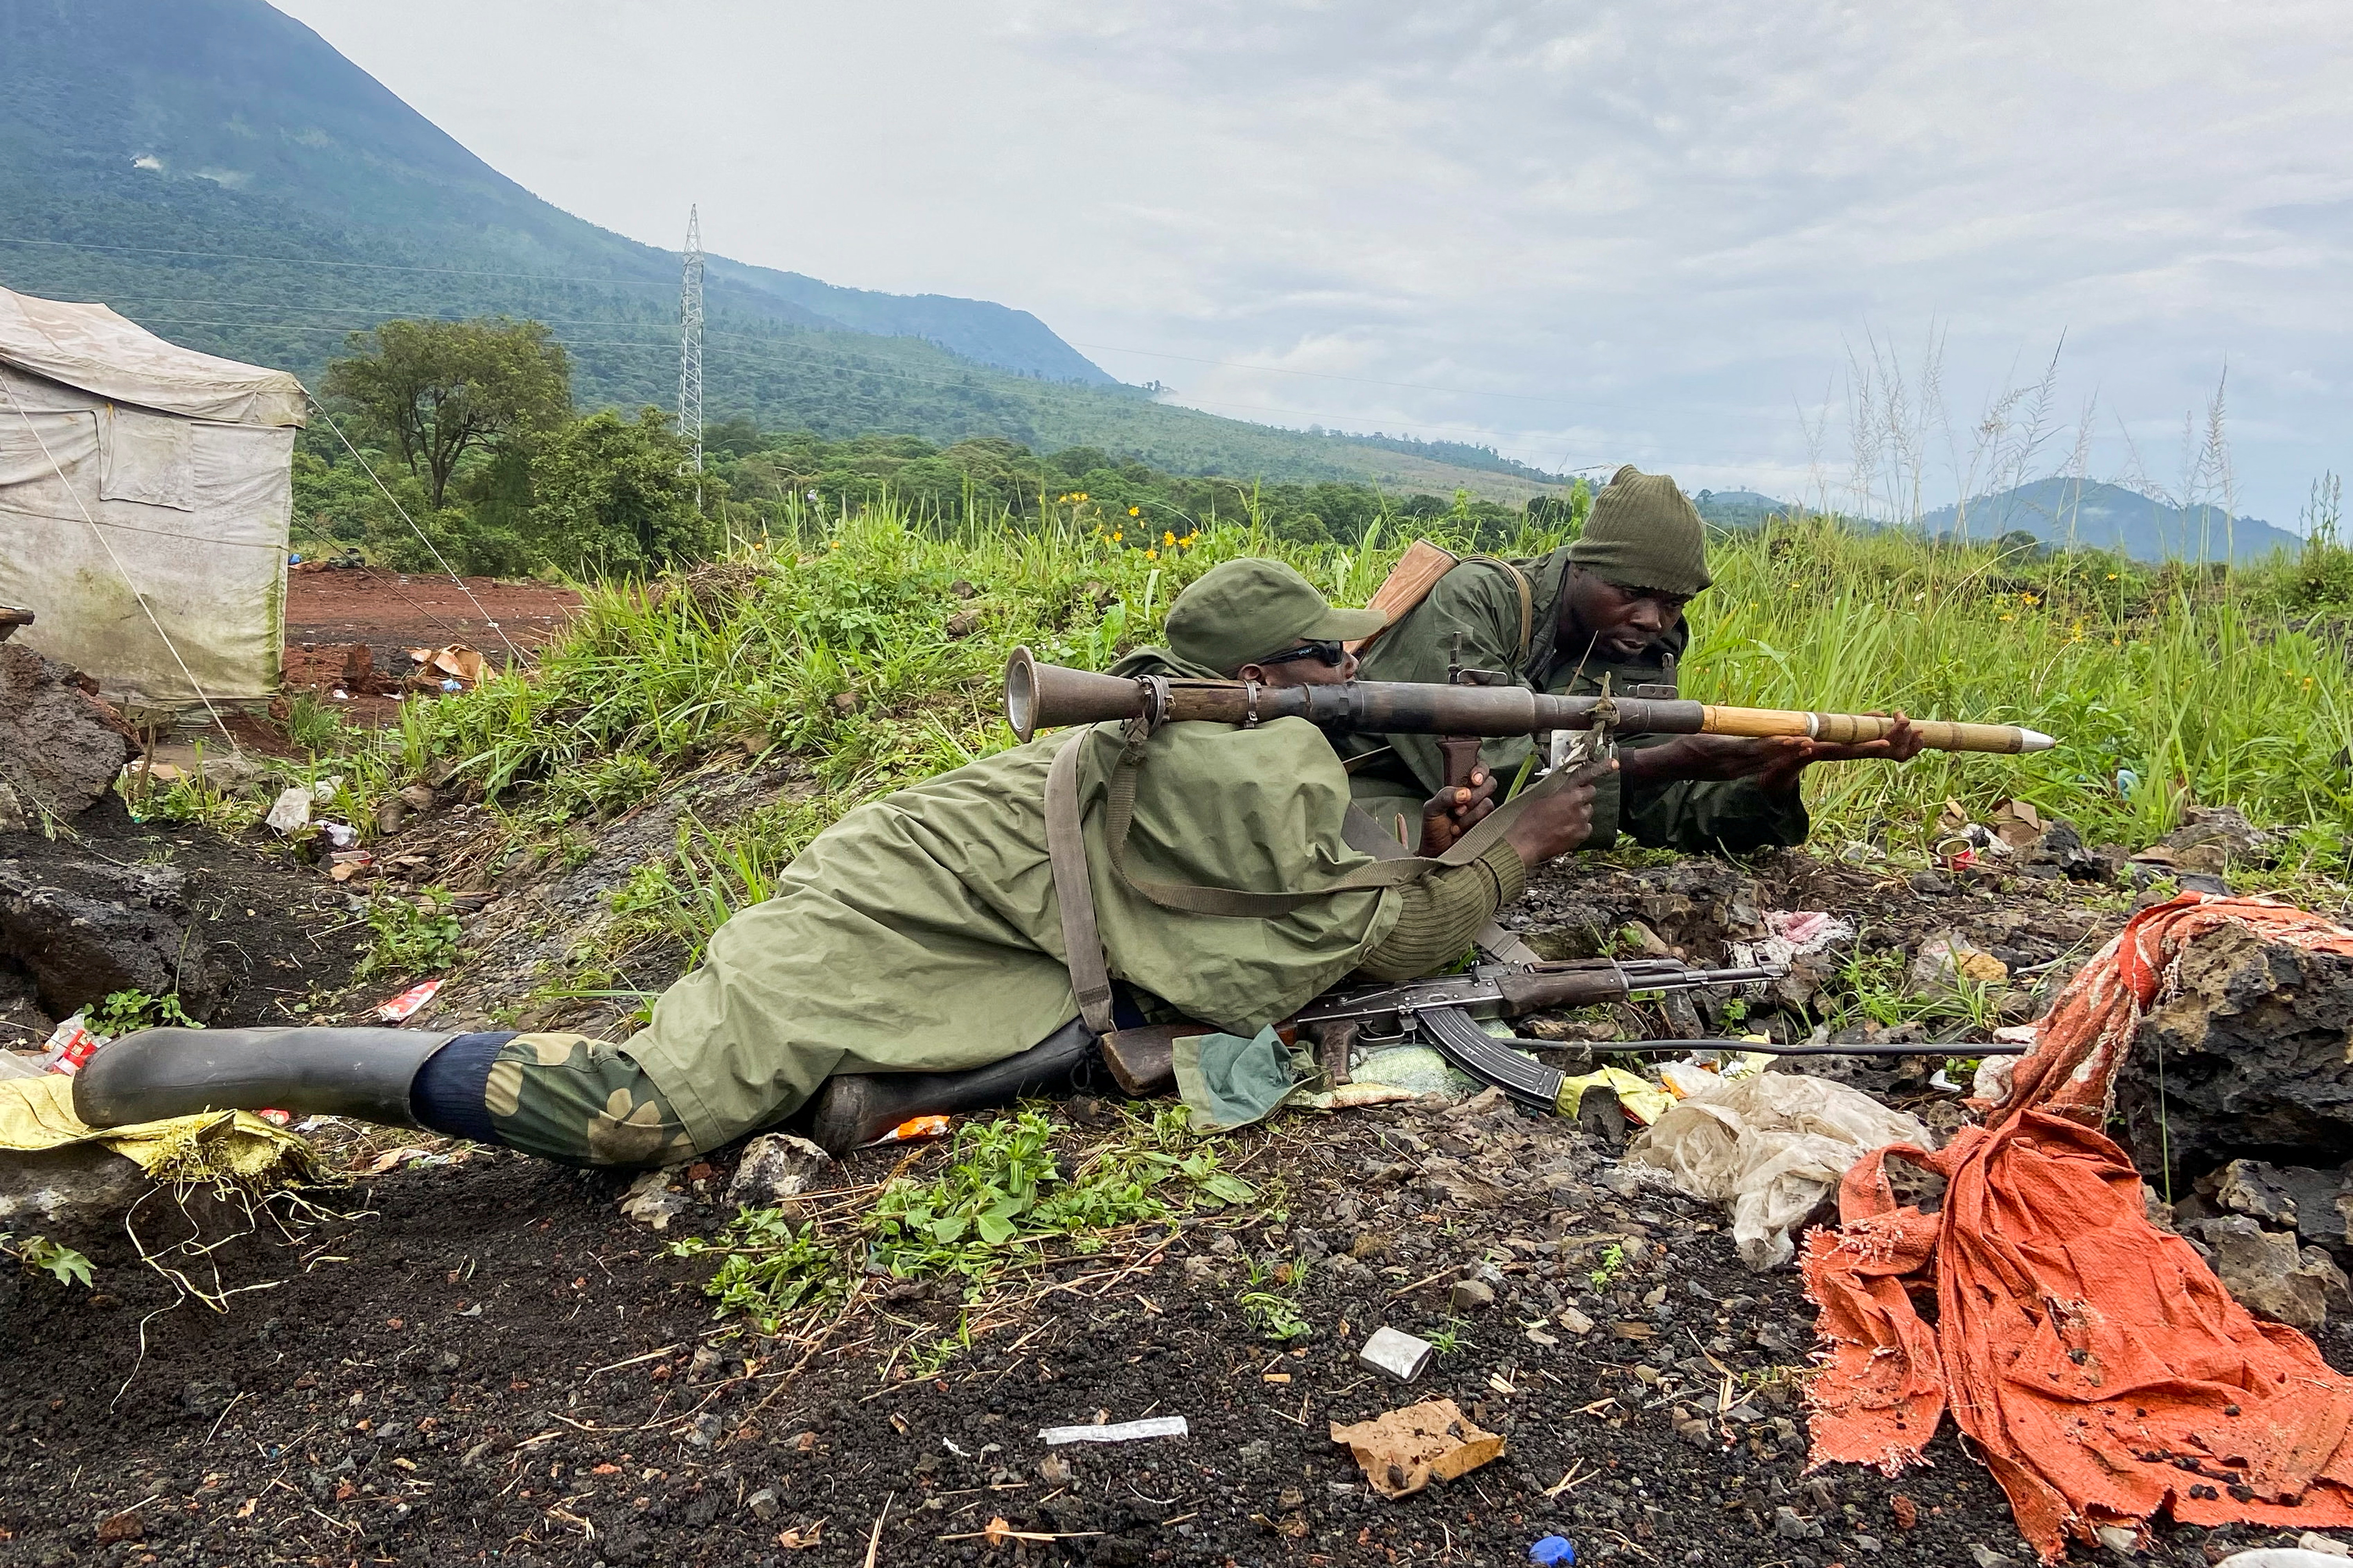 Soldiers of the Democratic Republic of the Congo take position following renewed fighting near the border with Rwanda